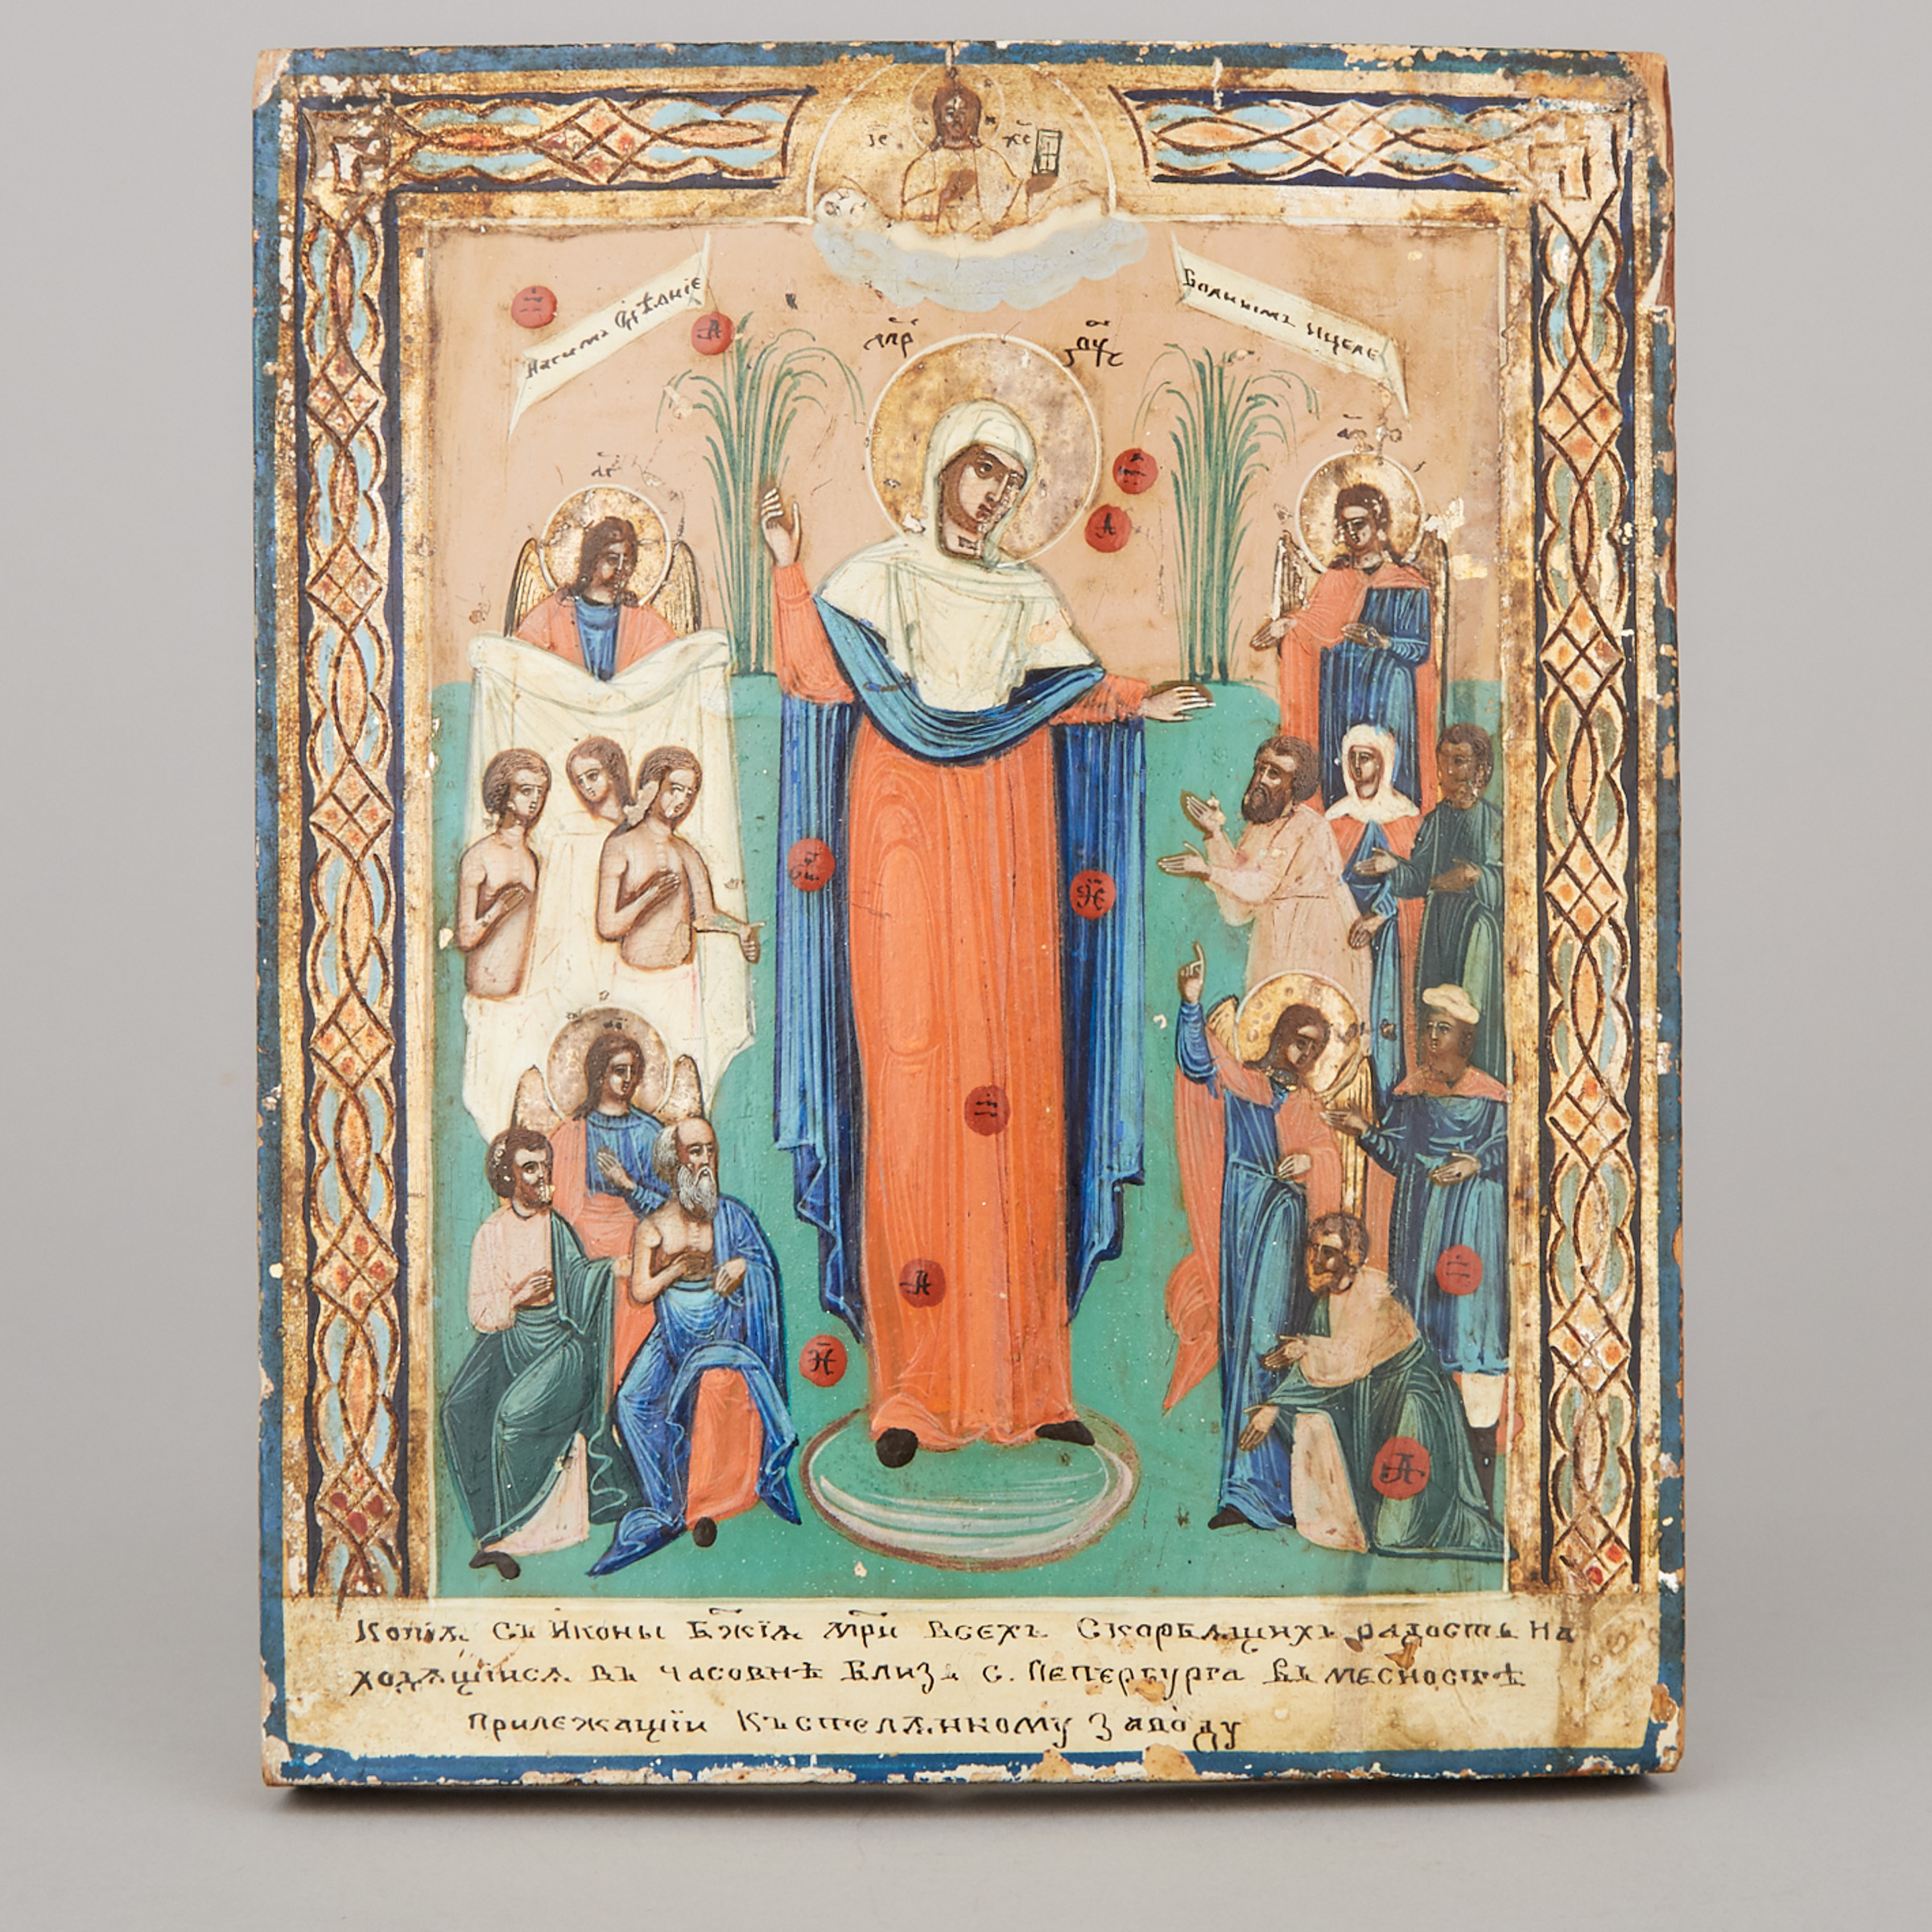 Russian Orthodox Mother of God Joy of All Who Sorrow Pilgrimage Icon, St. Petersburg, 19th century